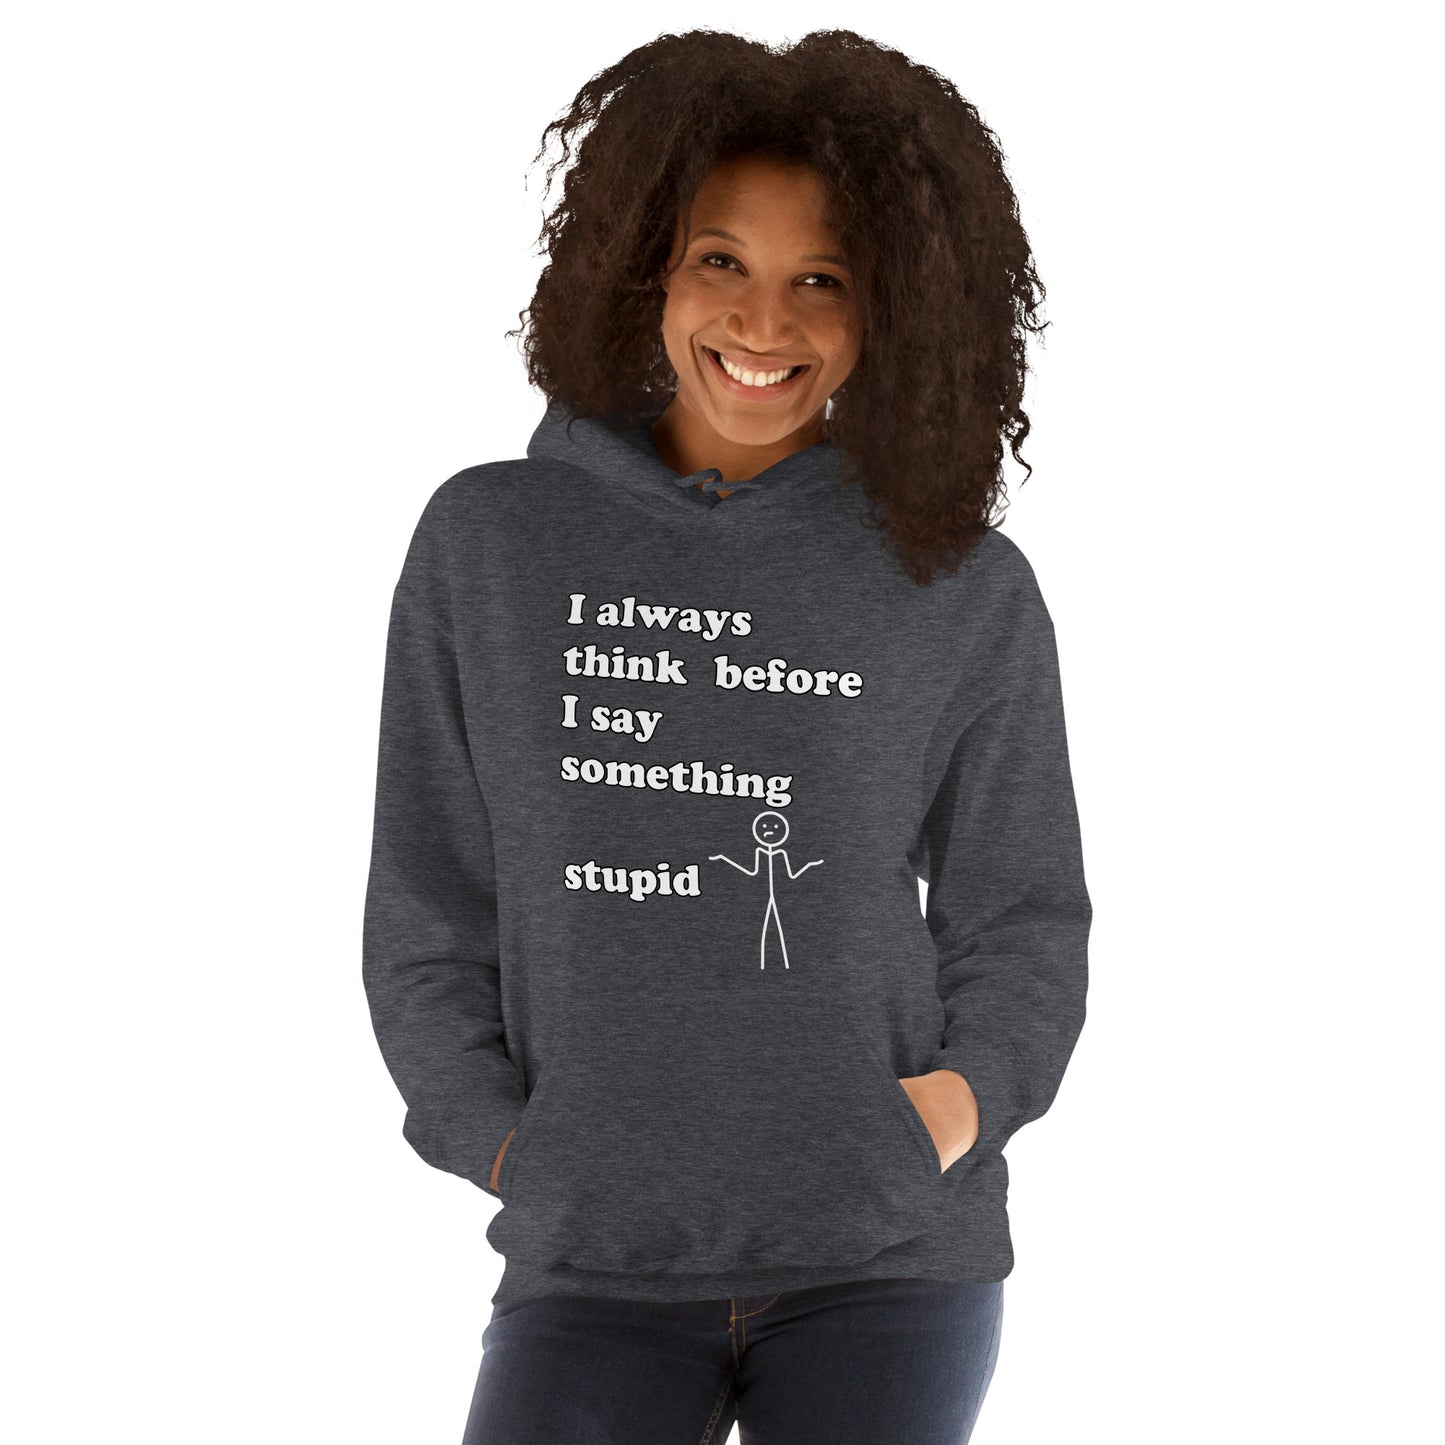 Woman with dark grey hoodie with text "I always think before I say something stupid"